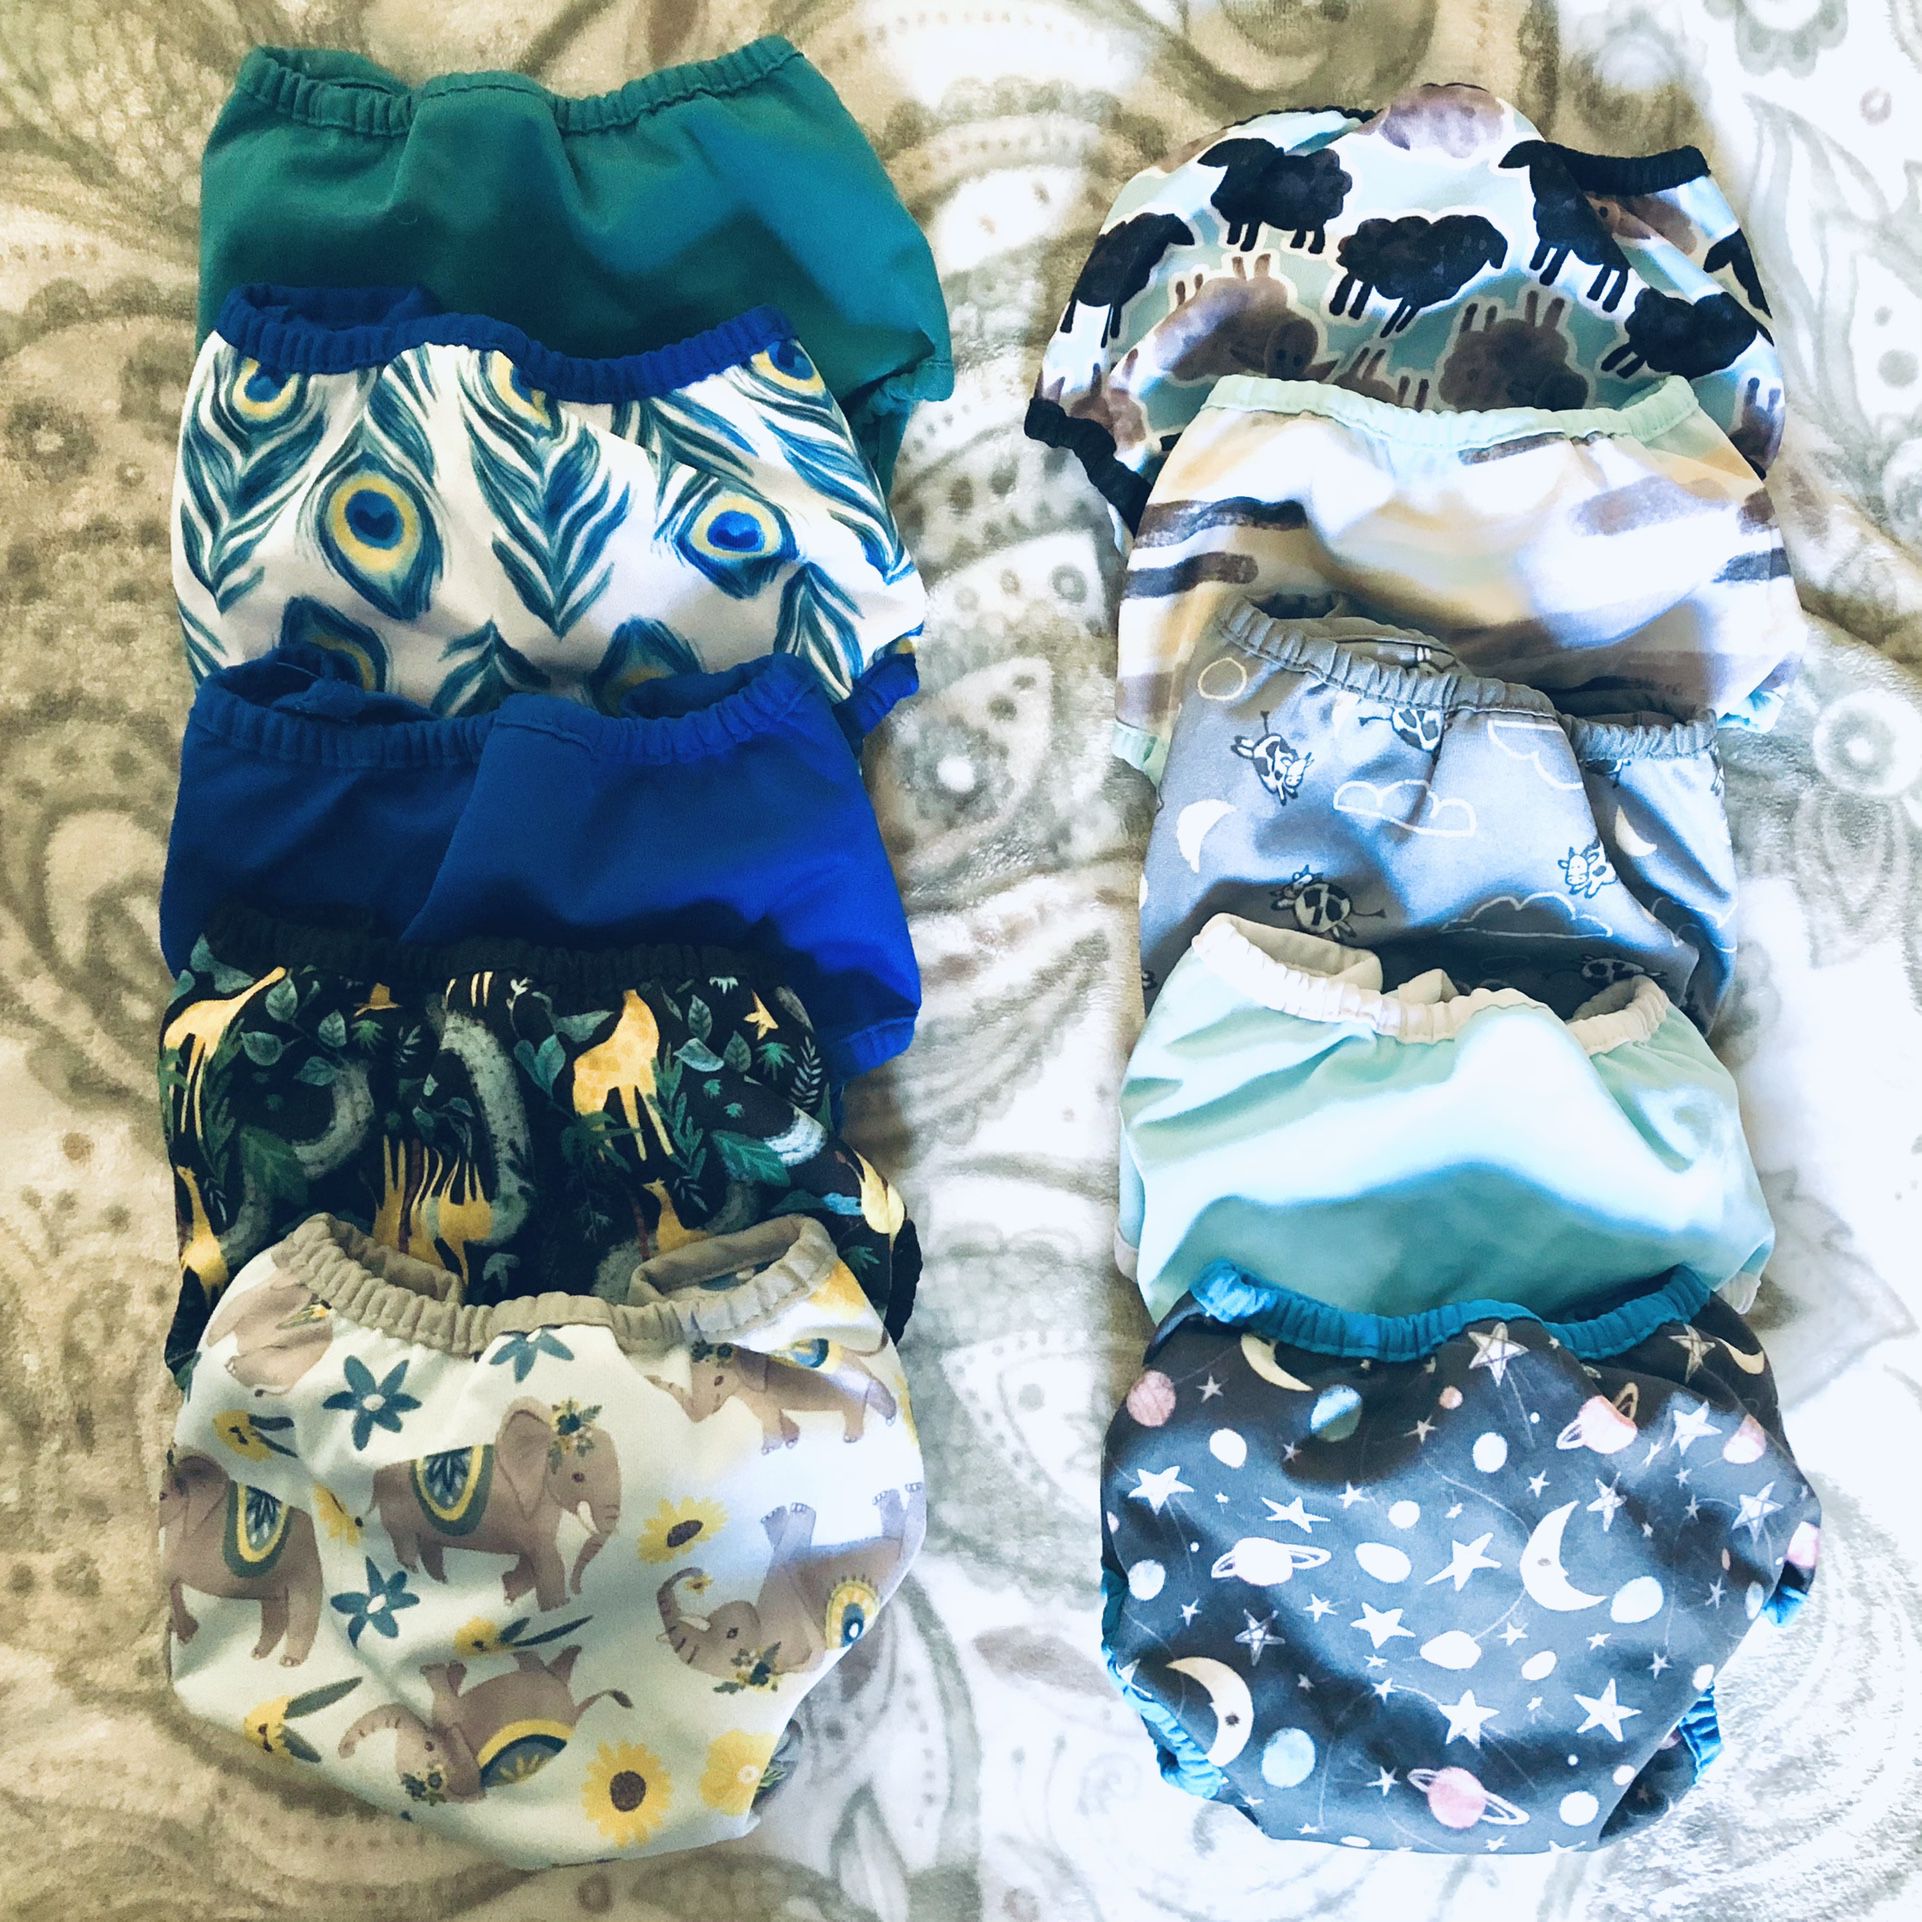 Cloth Diaper Set: 10 Unisex Diaper Covers, 24 Bamboo Liners, 24 Absorbency Pads